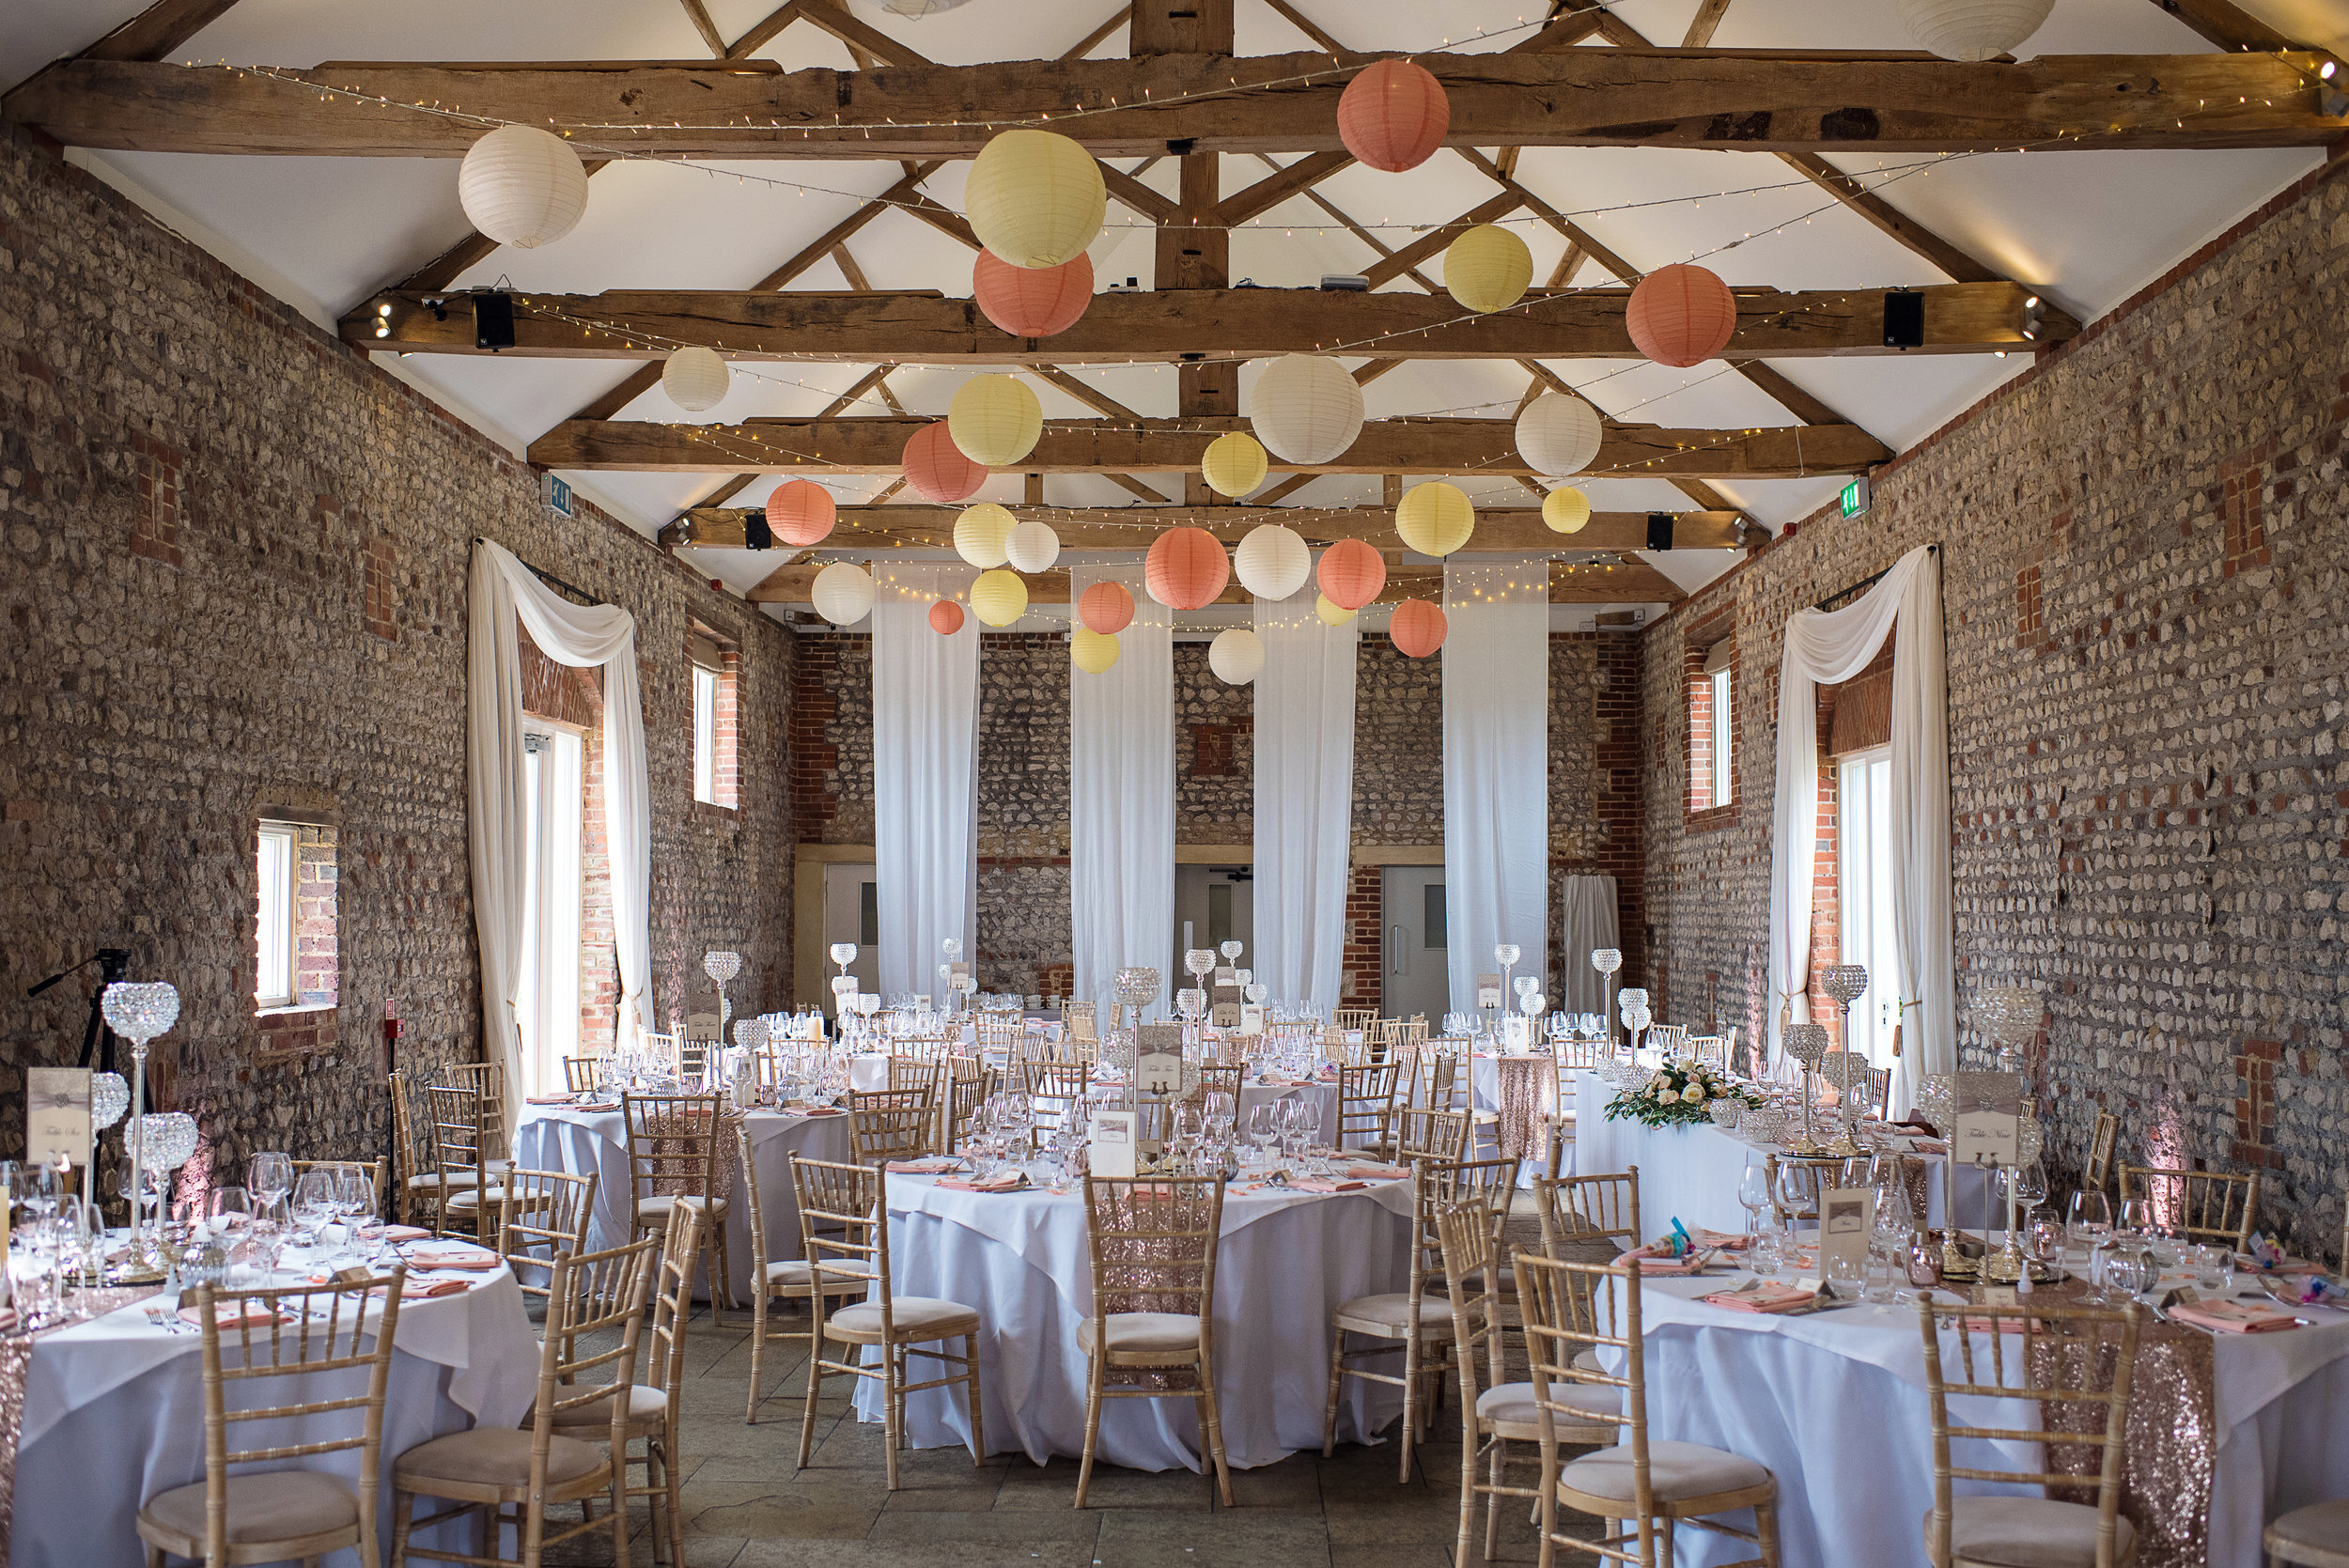 glam, peach and crystal decor including hanging lanterns at farbridge